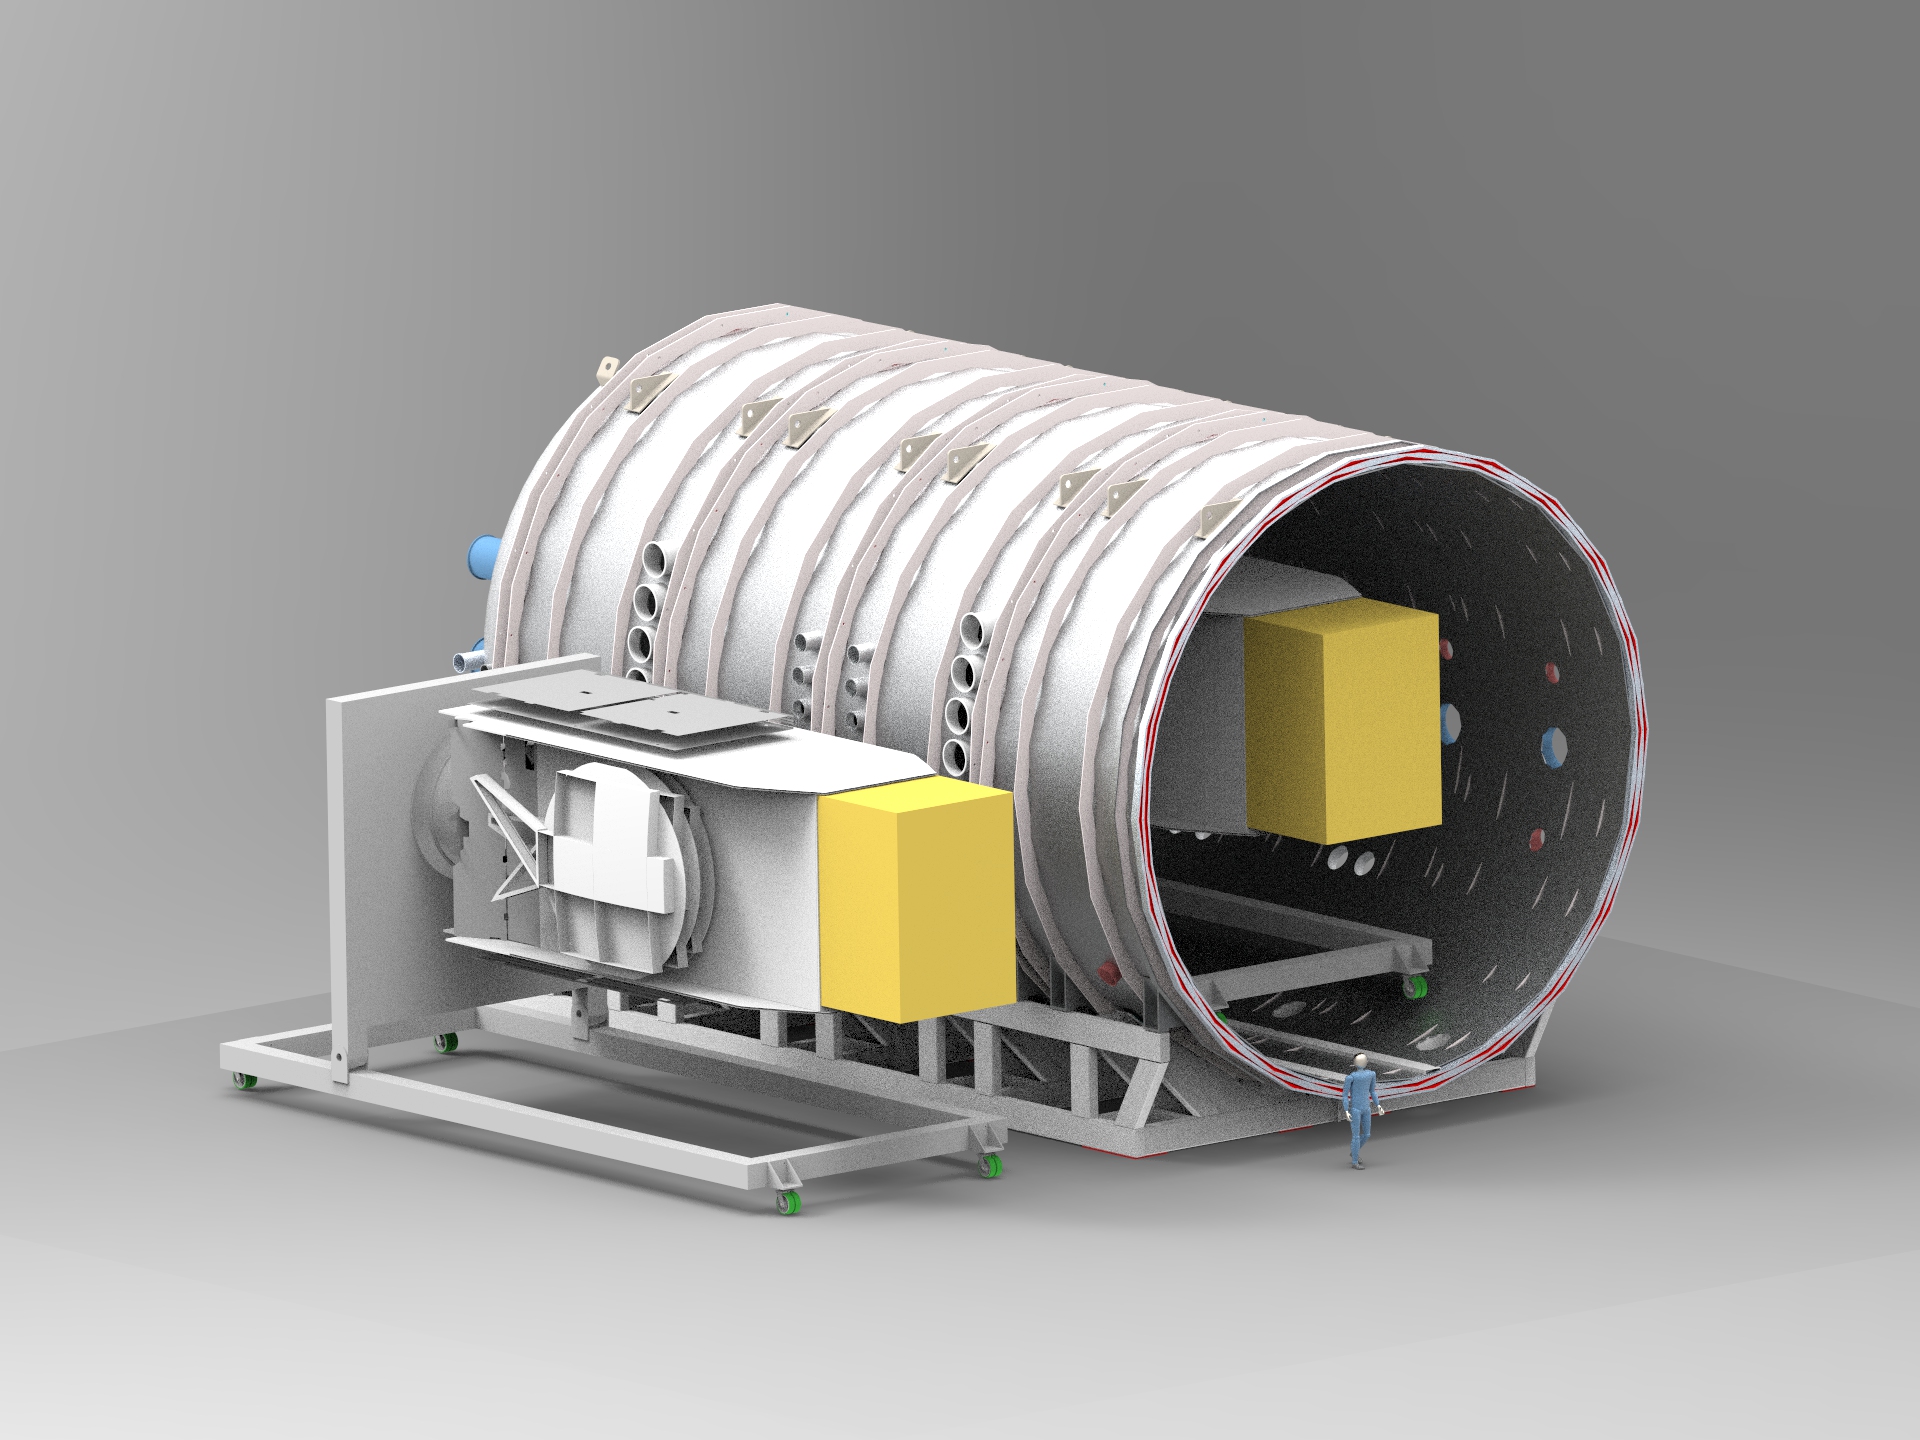 Artist's impression of the large space test chamber